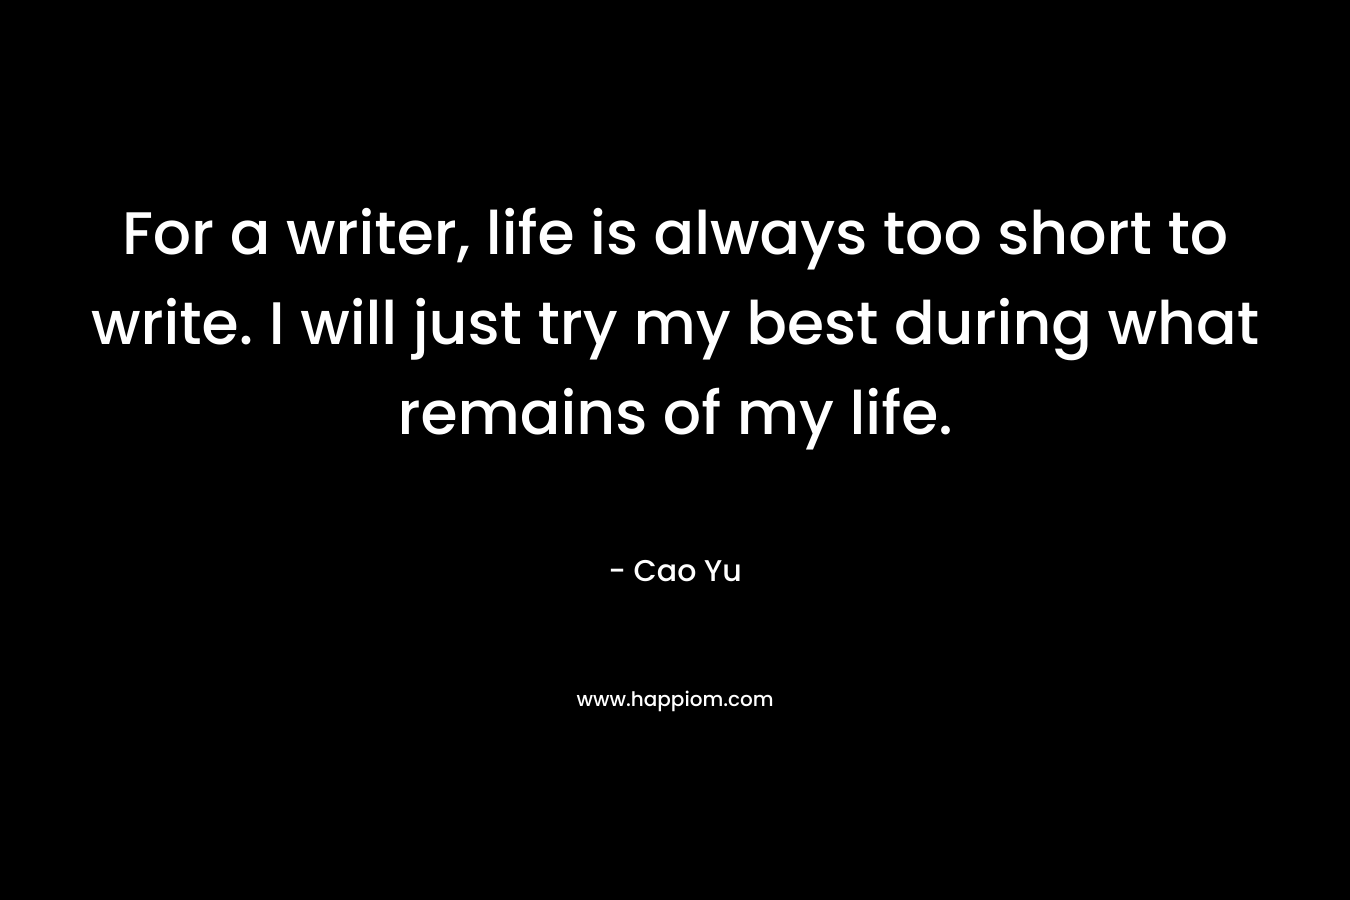 For a writer, life is always too short to write. I will just try my best during what remains of my life.